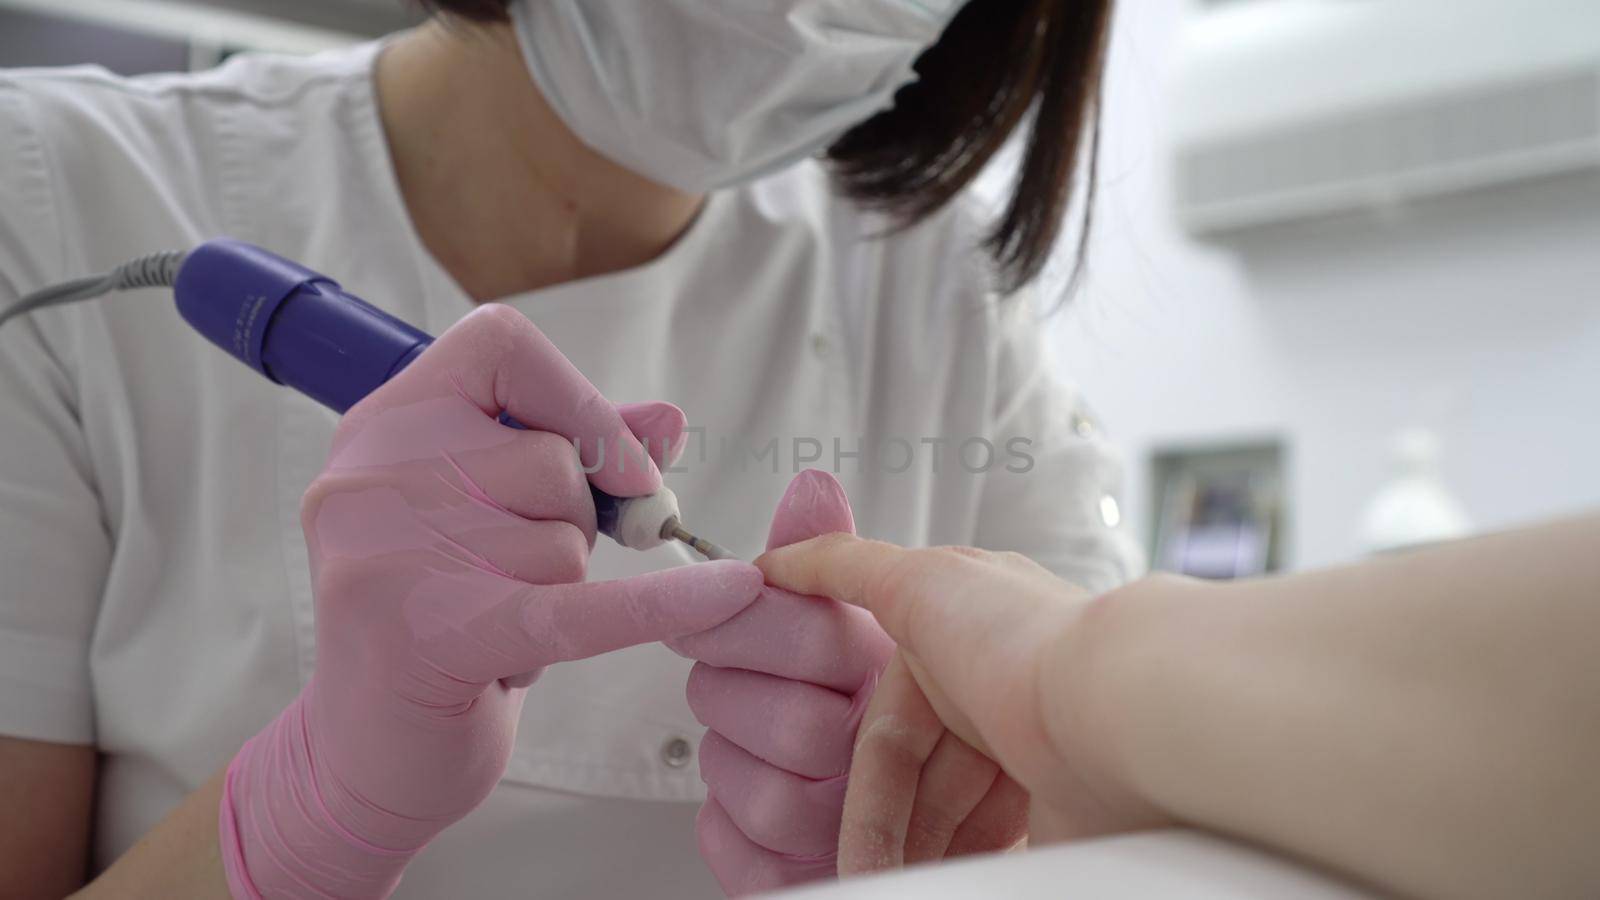 A professional manicurist using a drill tool cuts off old nails close-up. Nail care in a manicure salon. 4k